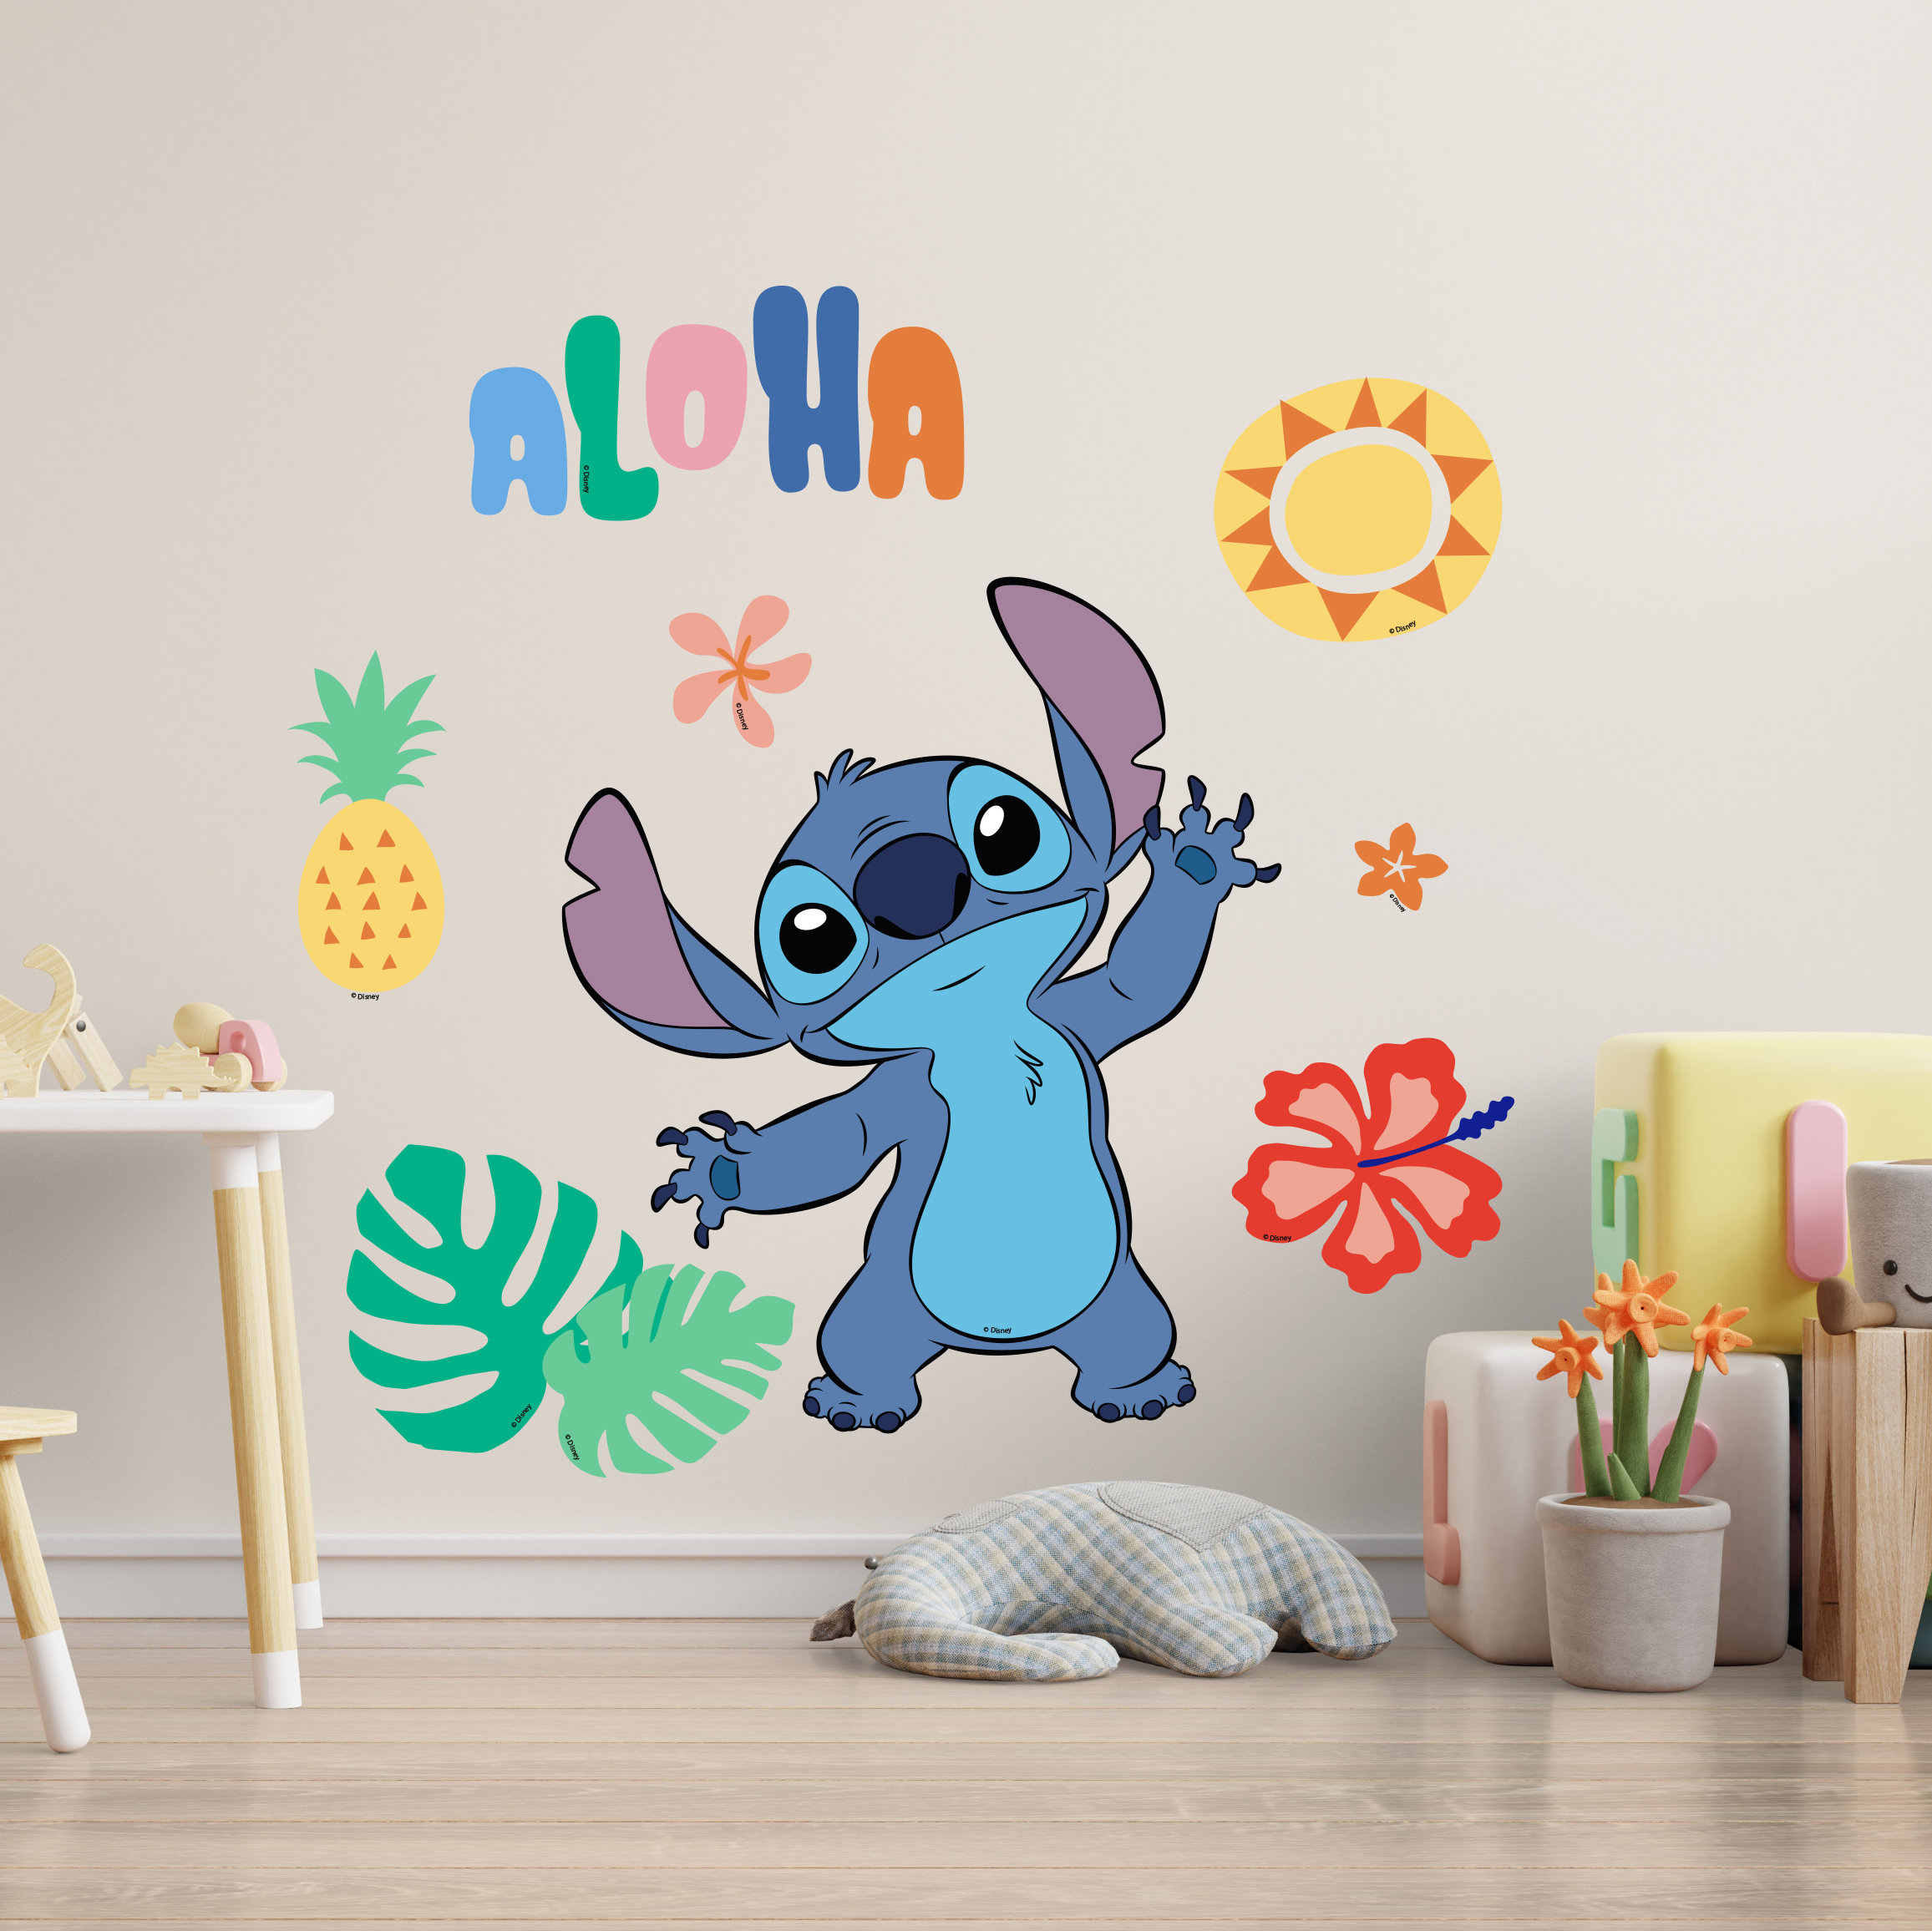 Lilo and Stitch Cute Disney Character Wall Stickers, by Design With Vinyl